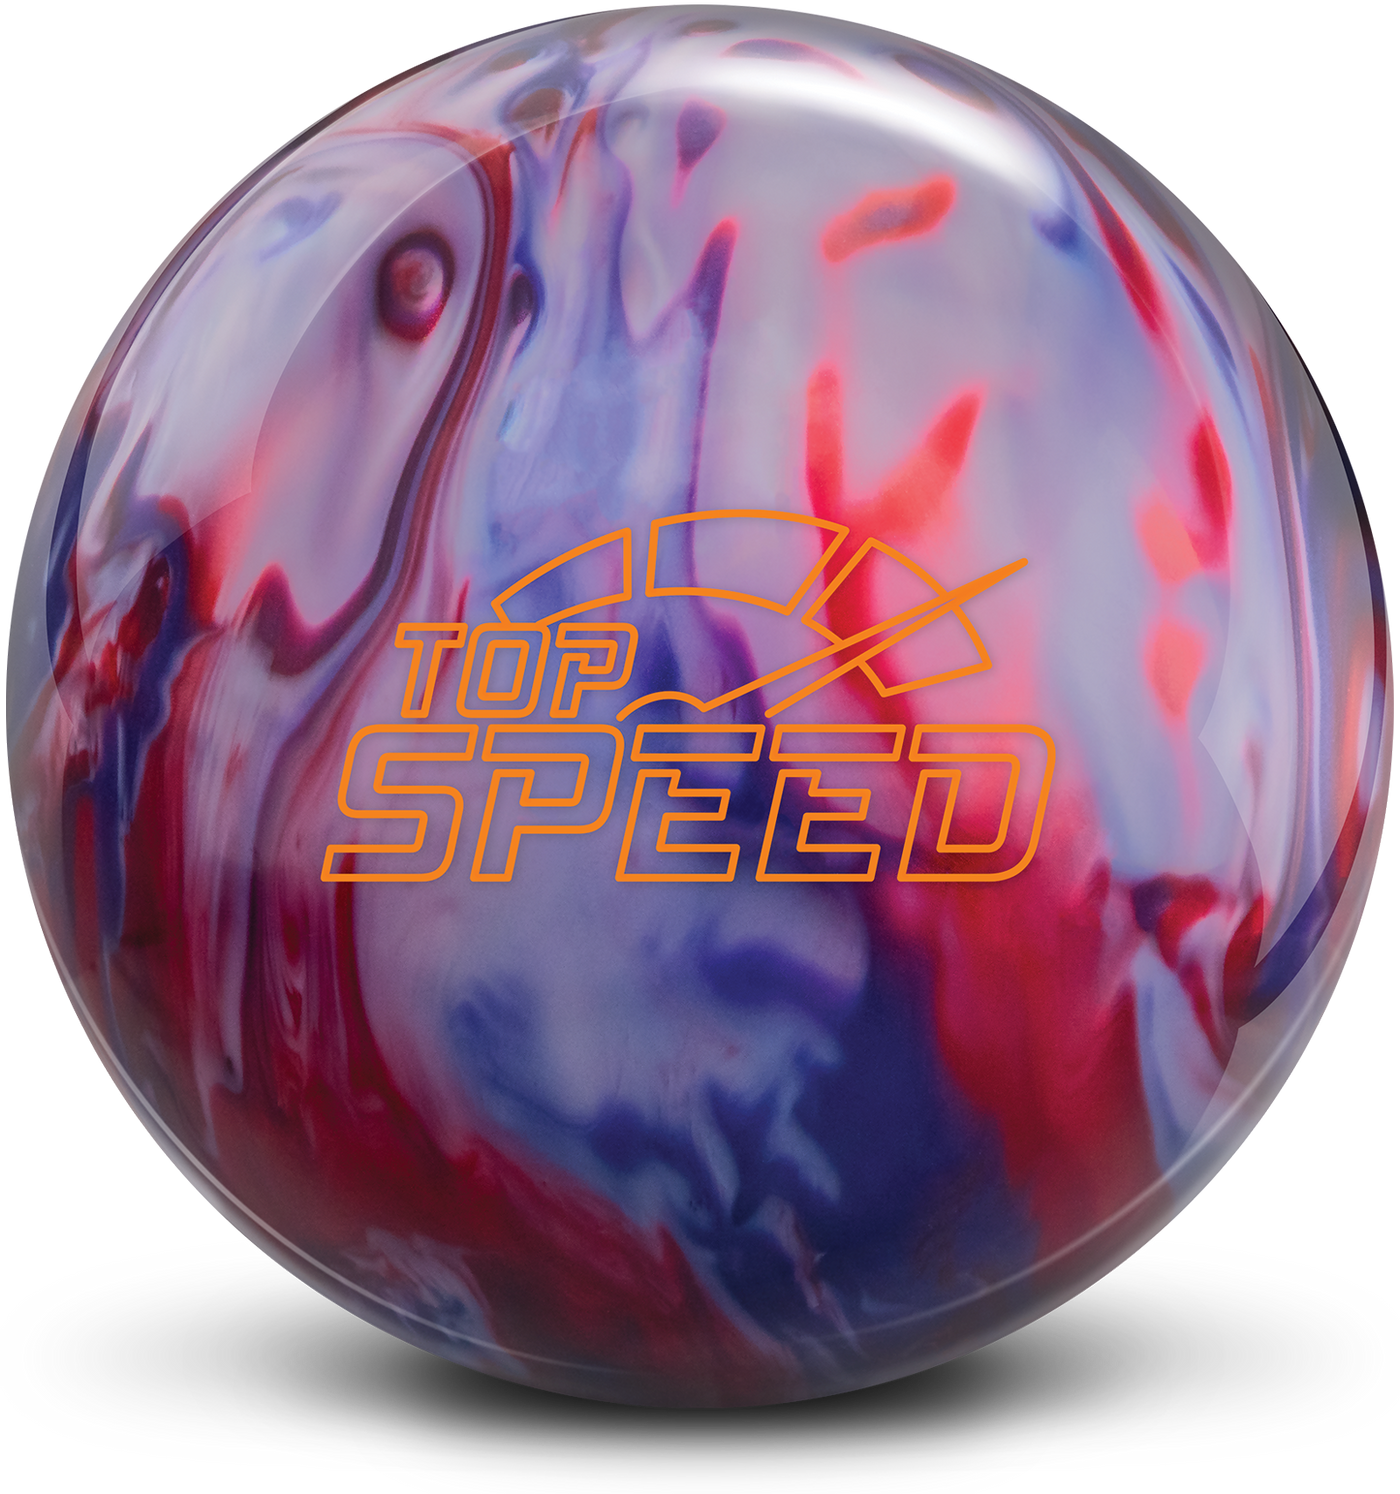 Top Speed Bowling Ball